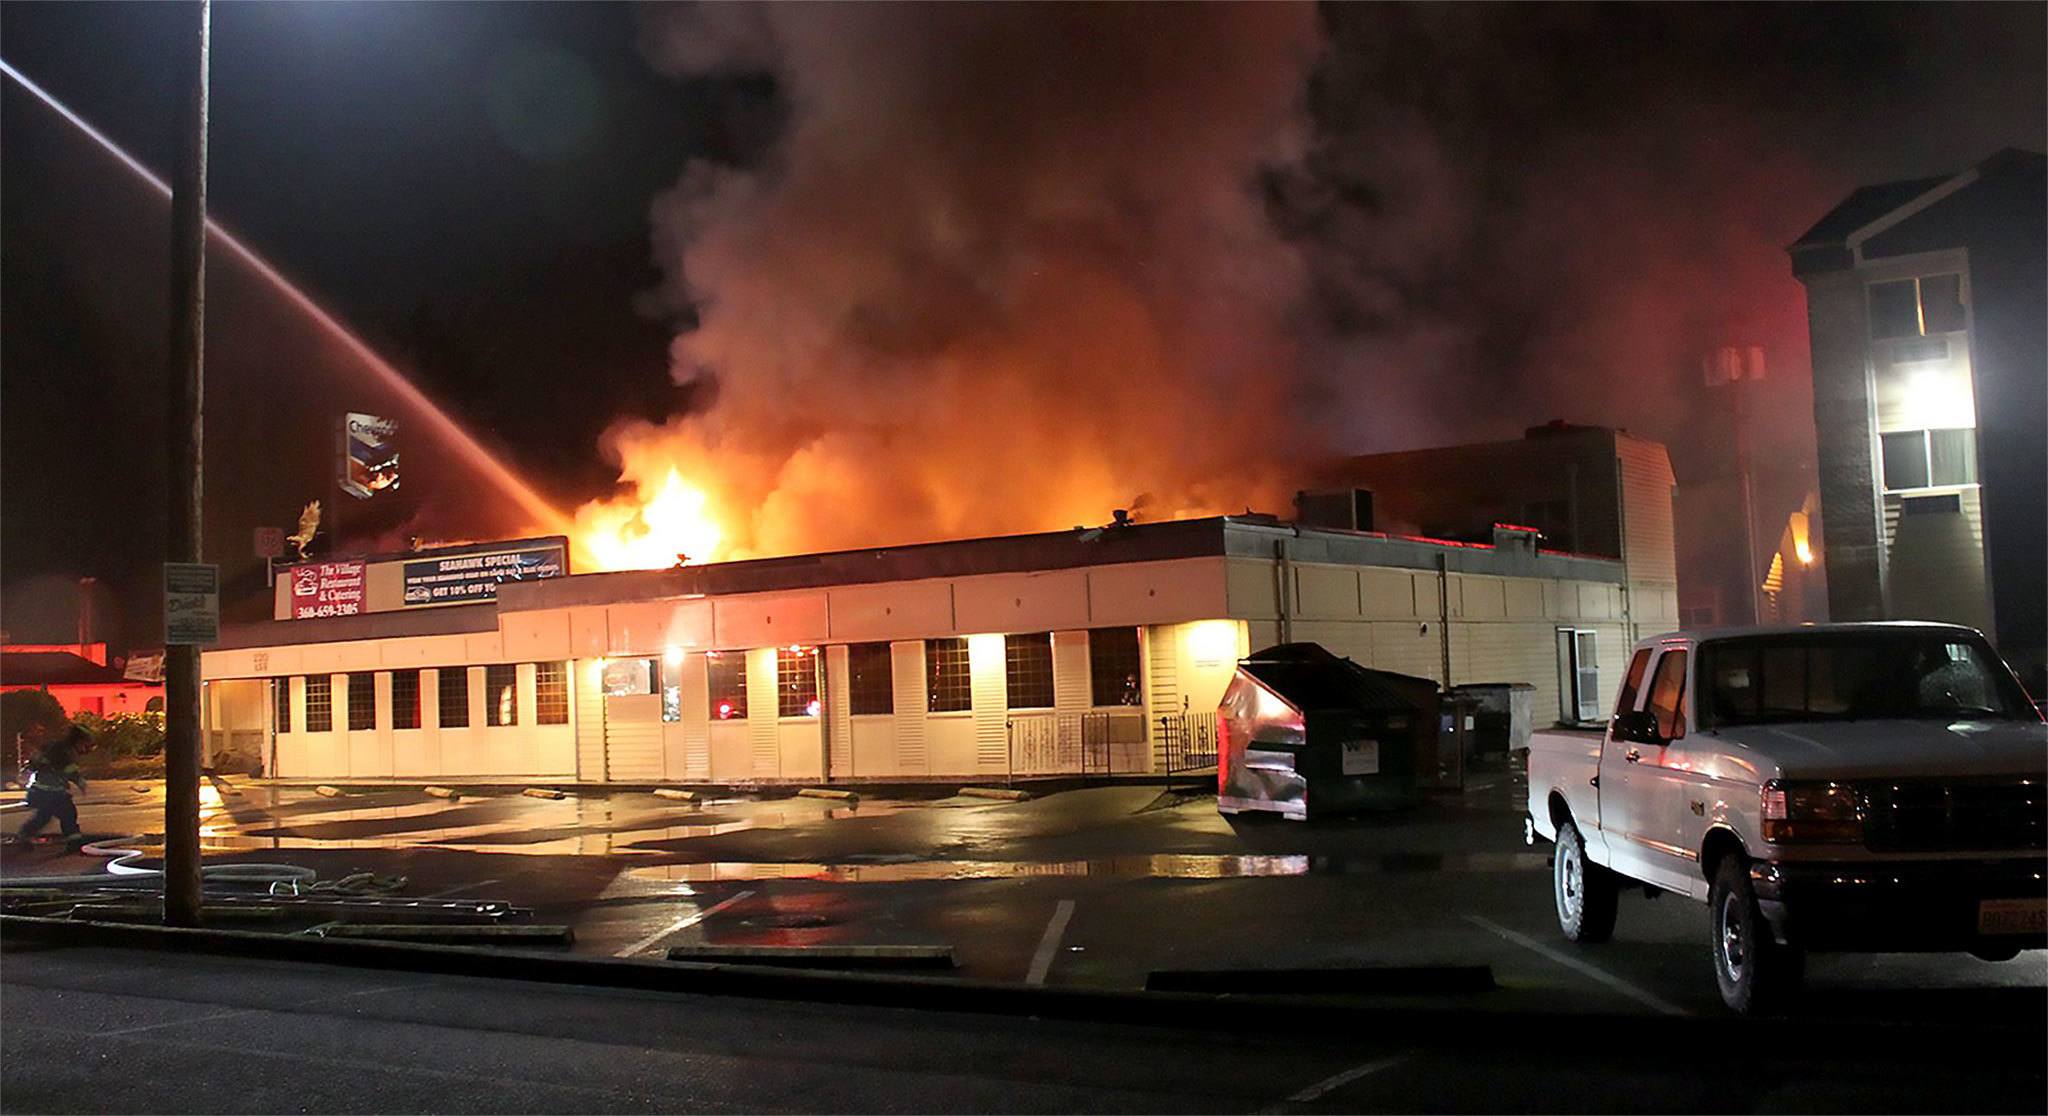 Water is poured on the early morning fire that did extensive damage to the Village Restaurant in Marysville on Sunday. (Marysville Fire District)